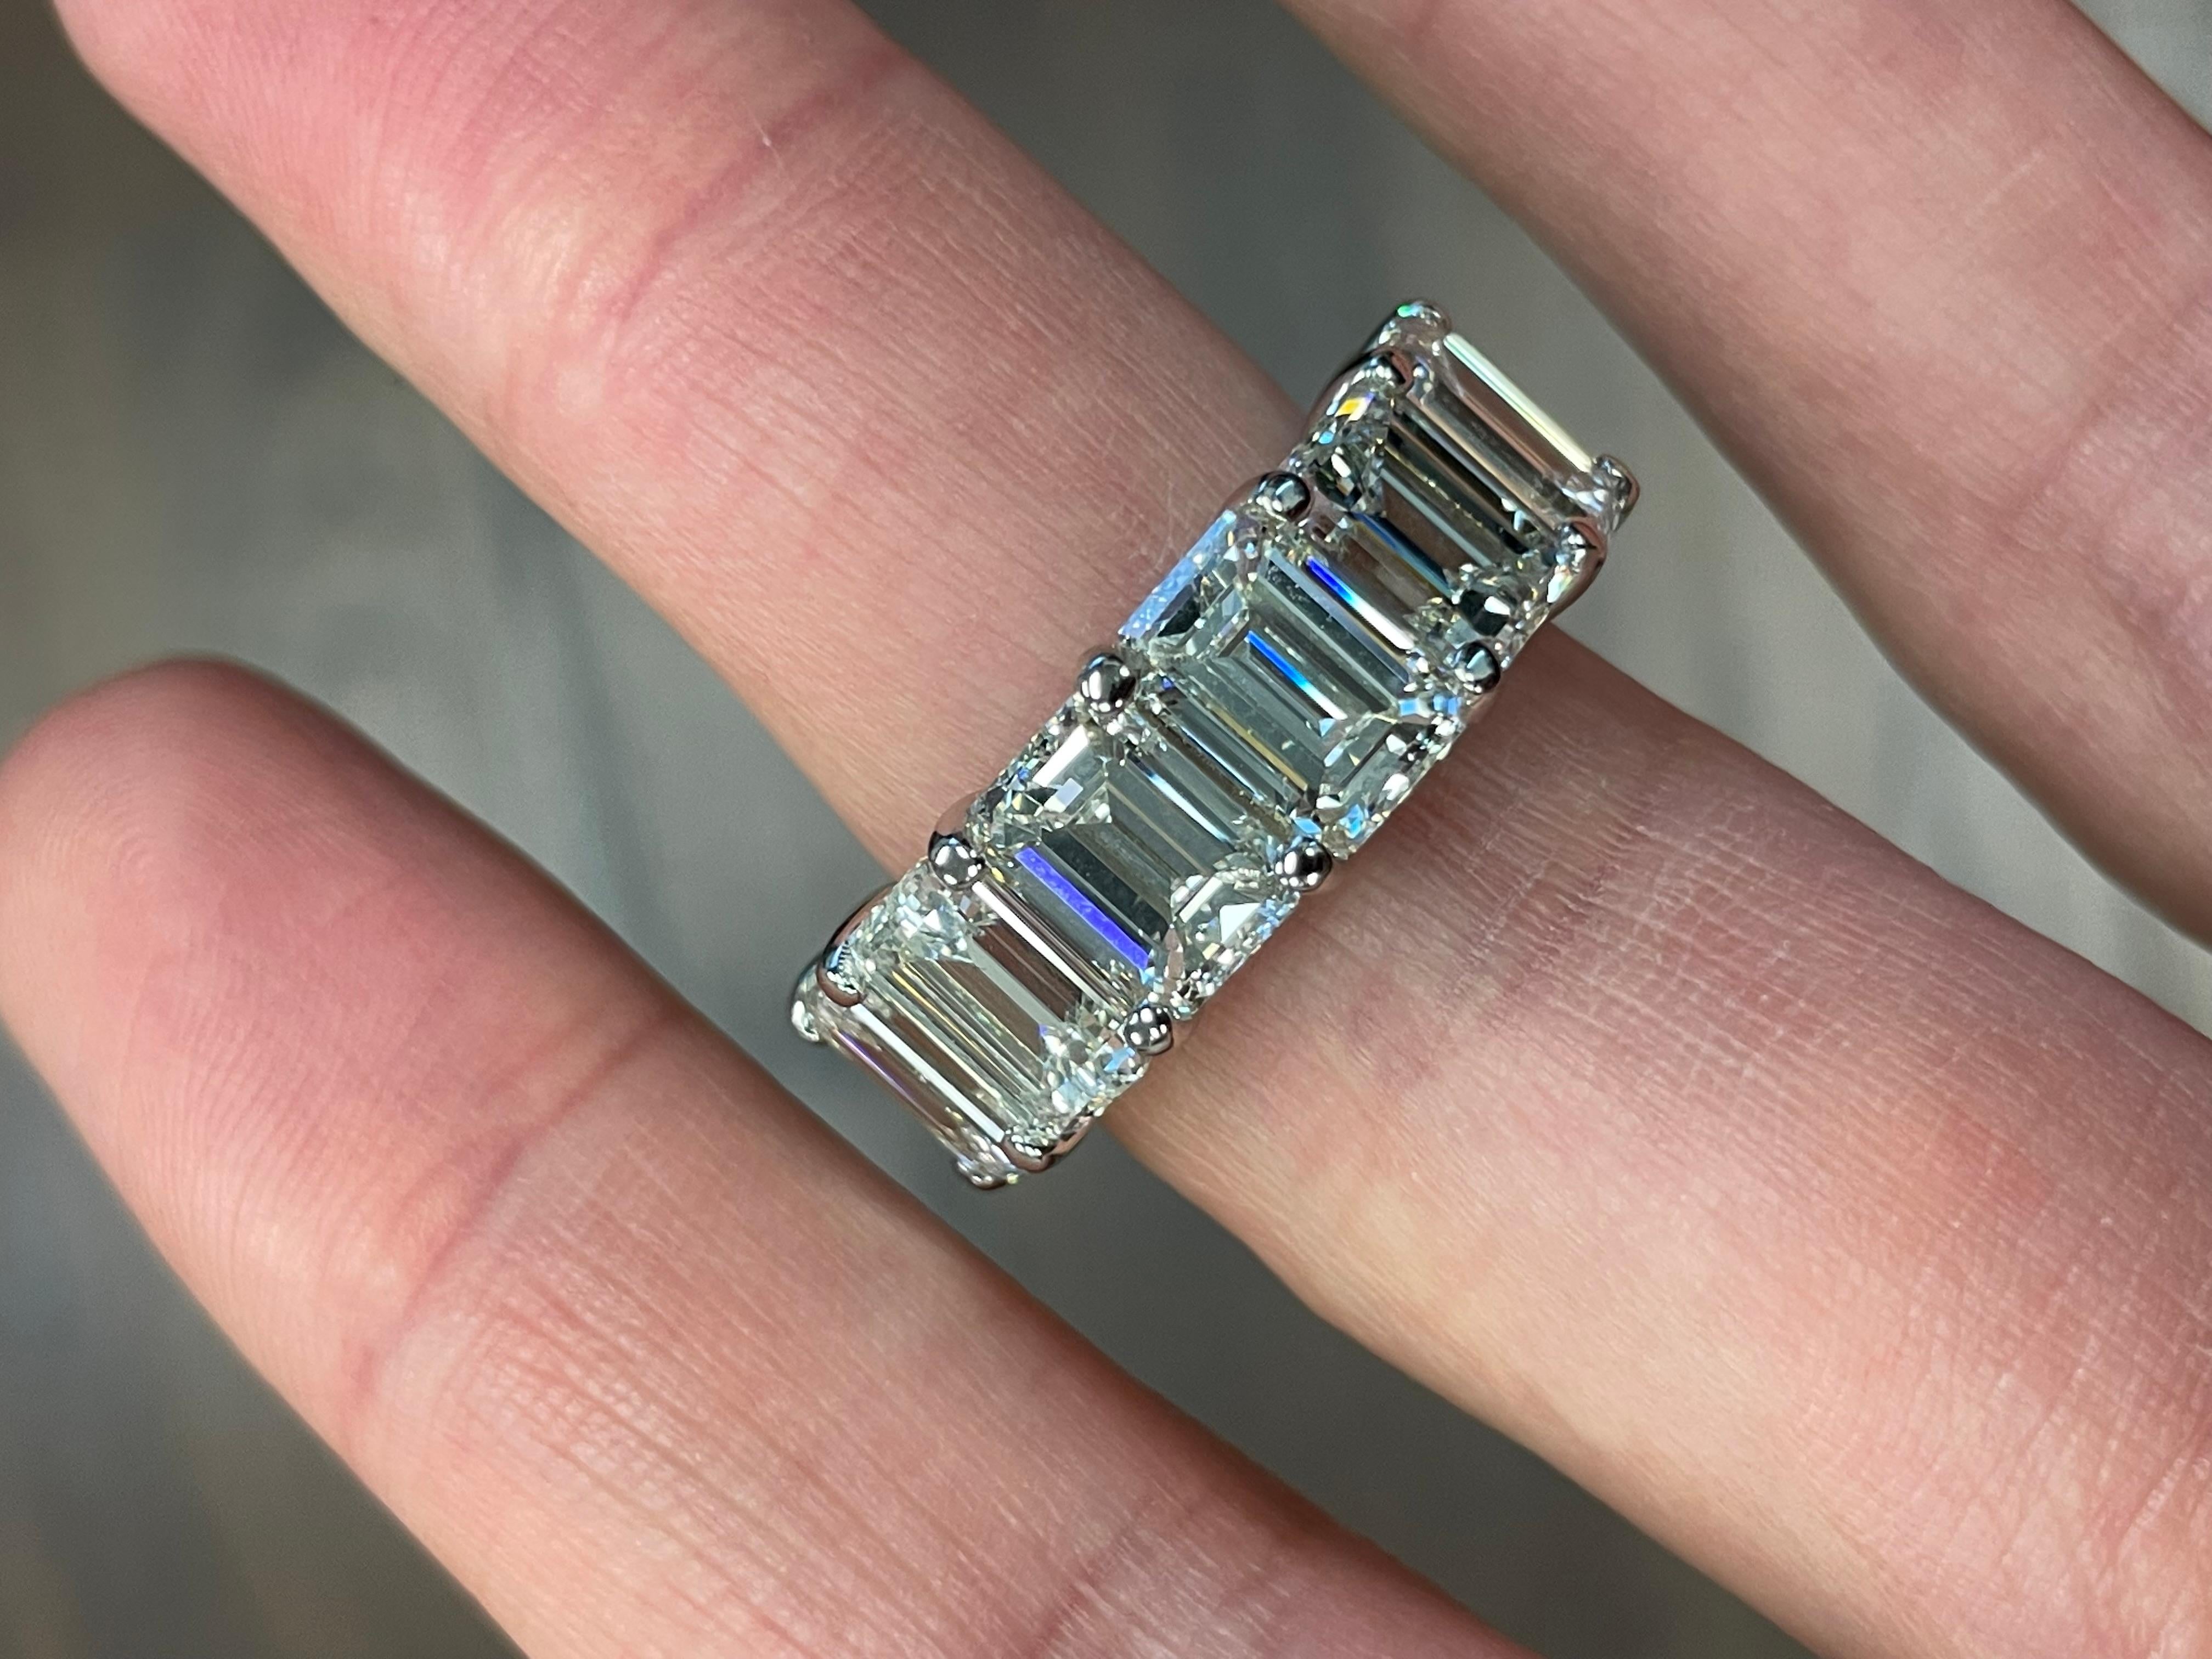 GIA Certified 19.81 Carat Emerald Cut Eternity Band 

Setting:
Platinum

Carat Weight: 19.81
Clarity: IF-VVS2
Color: J-K
13 Stones
*IF INTERESTED ASK FOR CERTS*

•Free Worldwide Shipping
•All Natural Diamonds/Gemstones

At EJ Diamonds, we work hard